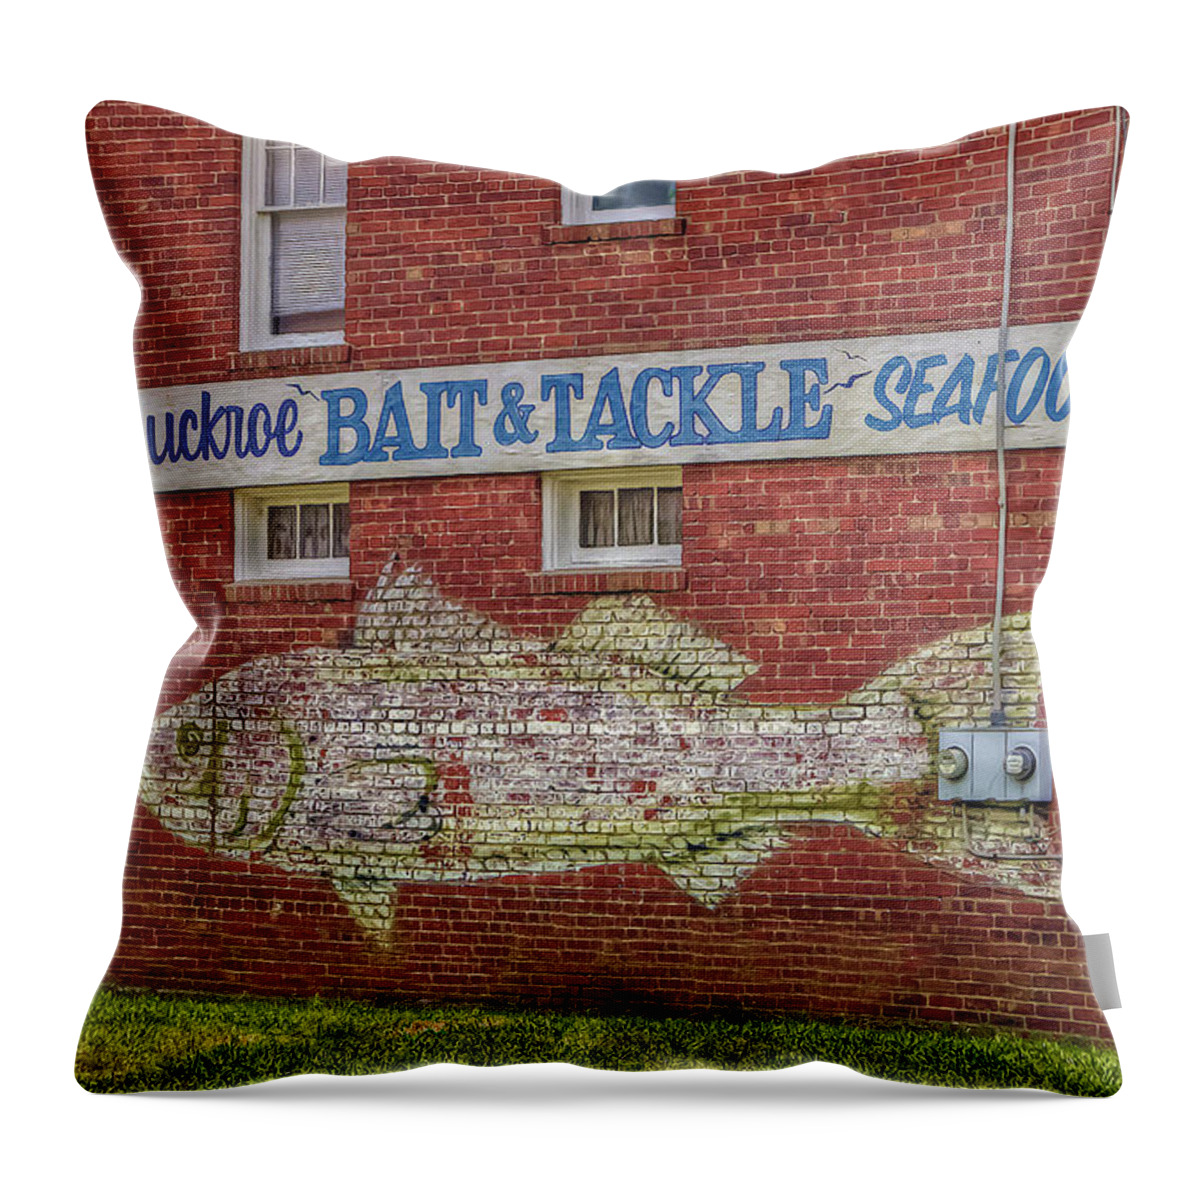 Buckroe Beach Throw Pillow featuring the photograph Buckroe Bait Tackle Seafood Shop by Jerry Gammon